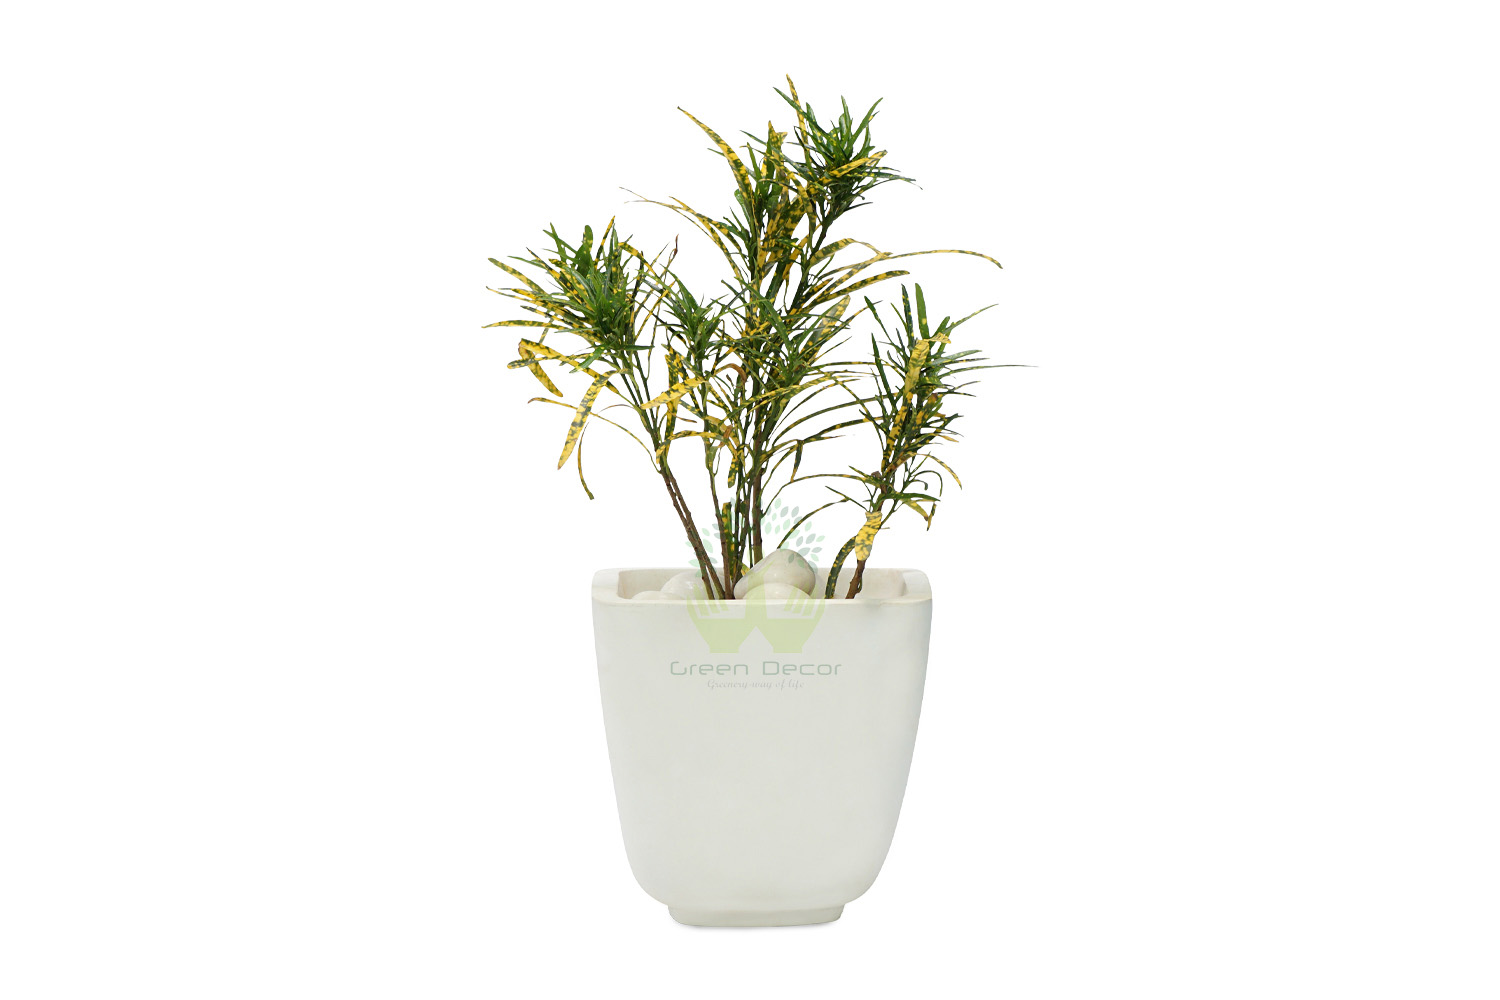 Buy Croton Golden Dust Thin Leaves Front View, White Pots and Seeds in Delhi NCR by the best online nursery shop Greendecor.